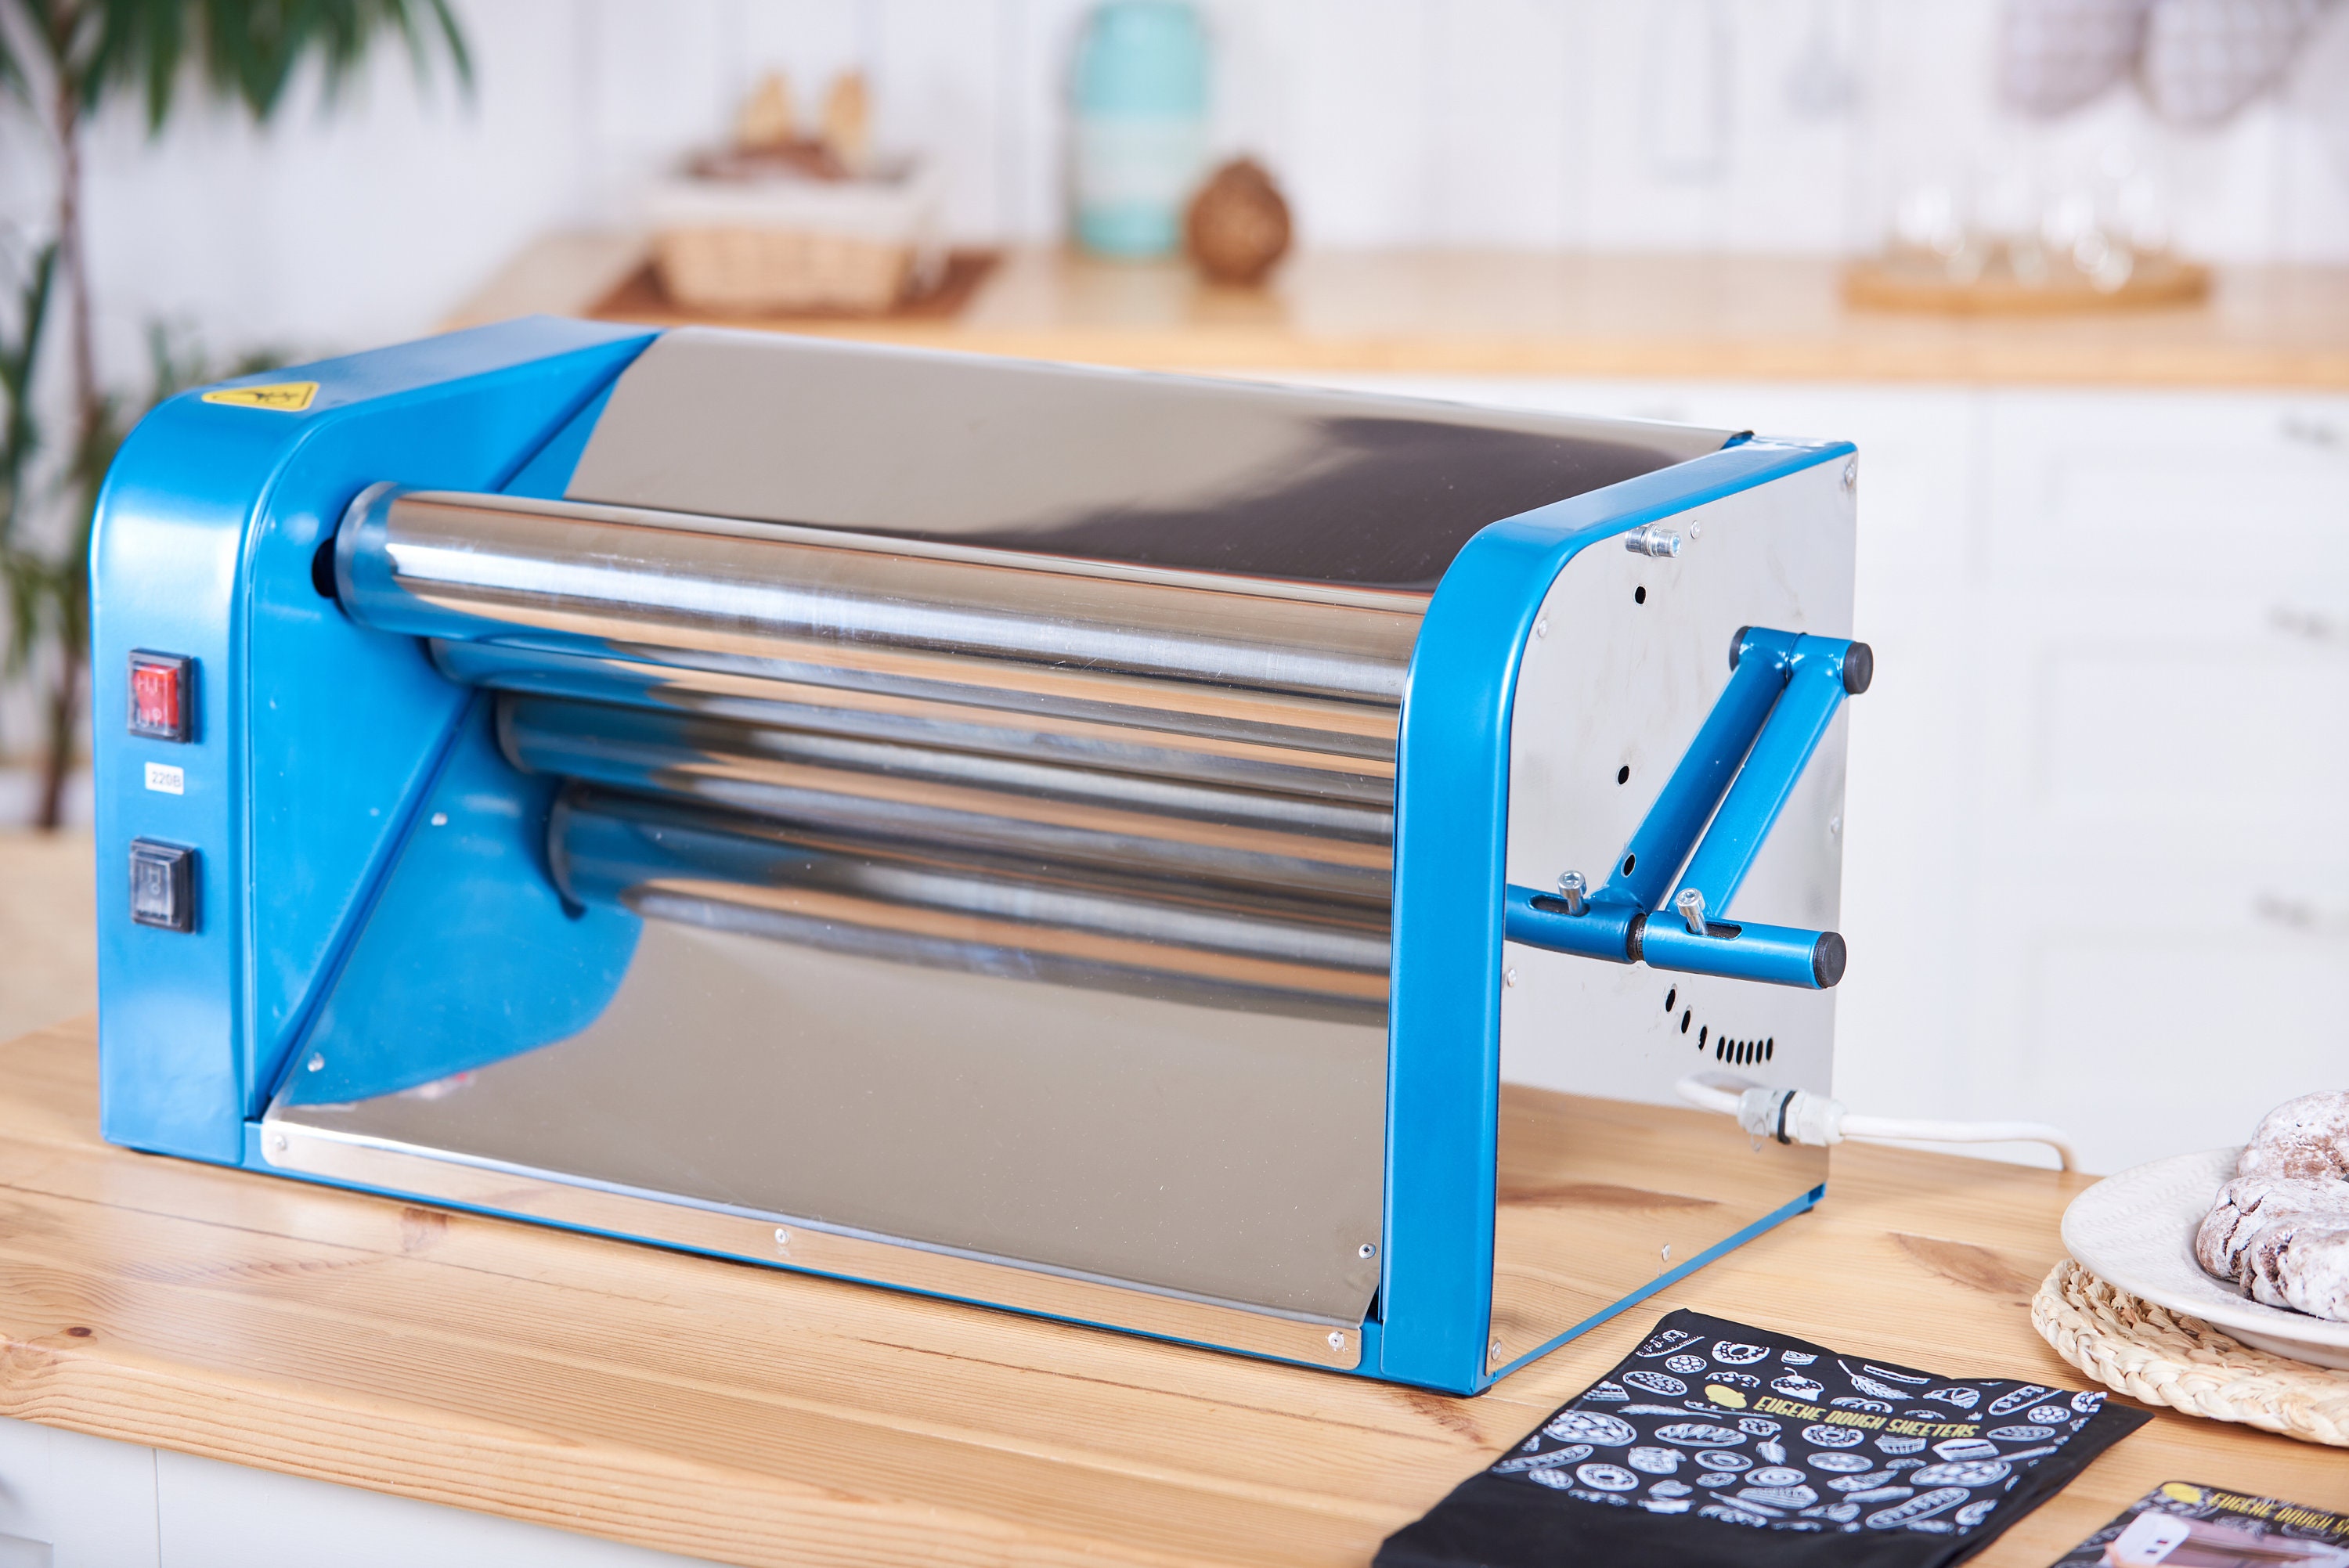 Dough Sheeter Electric for Home Use and Cafe Dough Roller -  in 2023